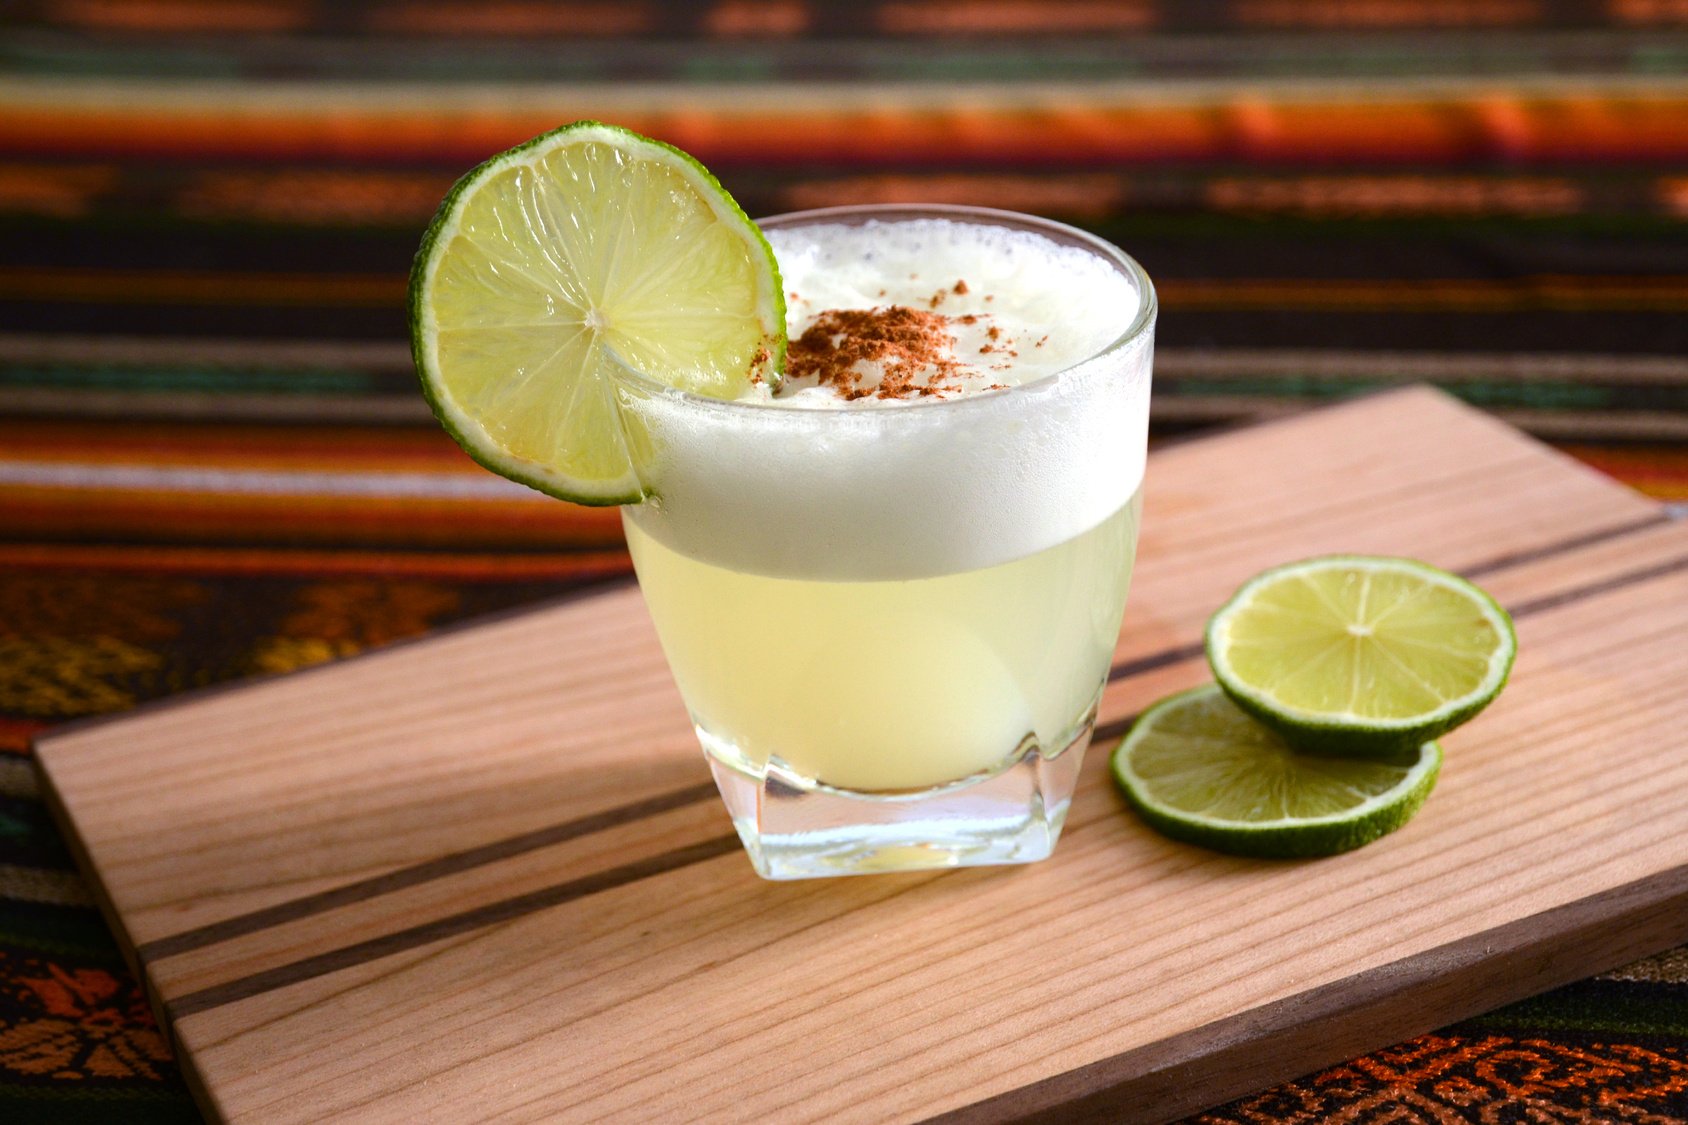 How to make Pisco Sour